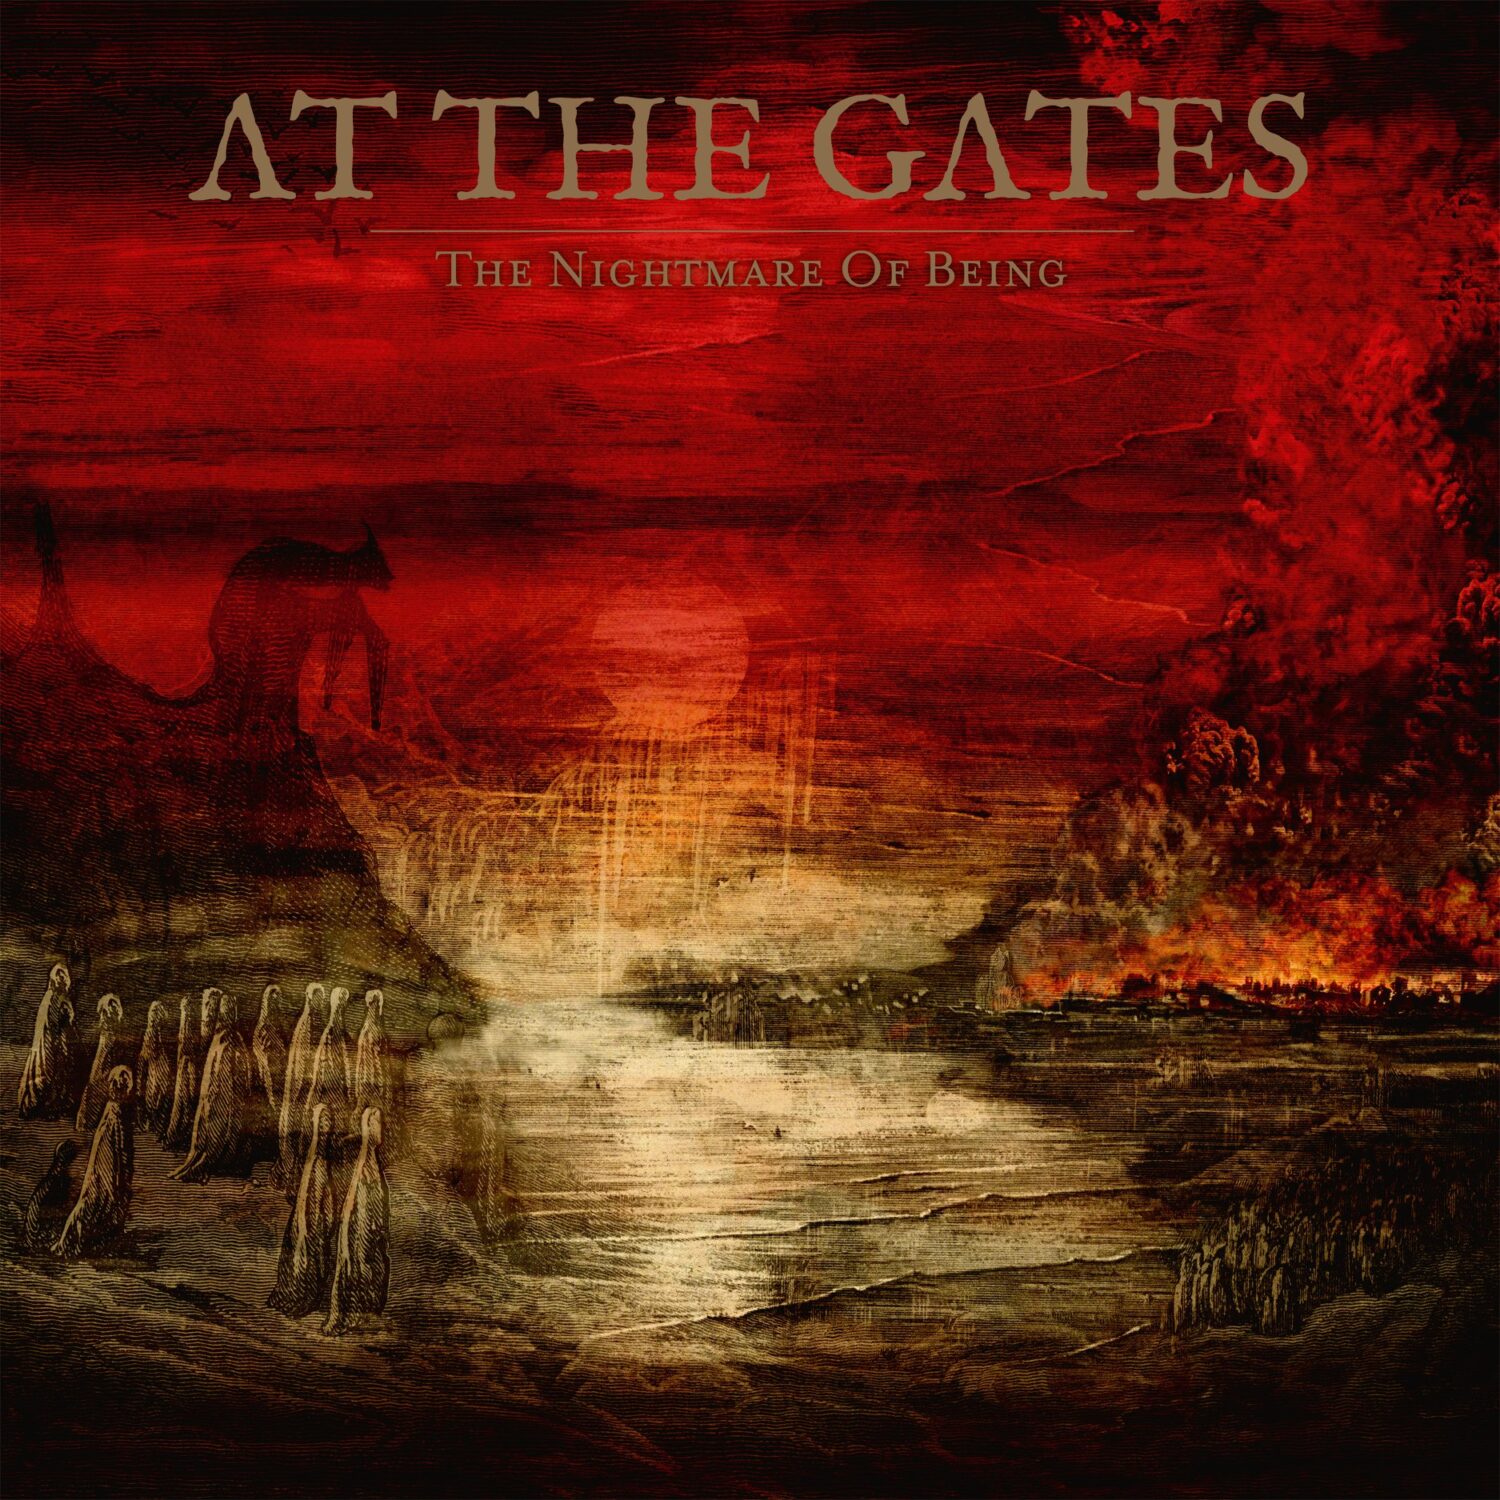 At The Gates The Nightmare Of Being 2021 1500x1500 - AT THE GATES revela detalles de su nuevo álbum "The Nightmare Of Being"